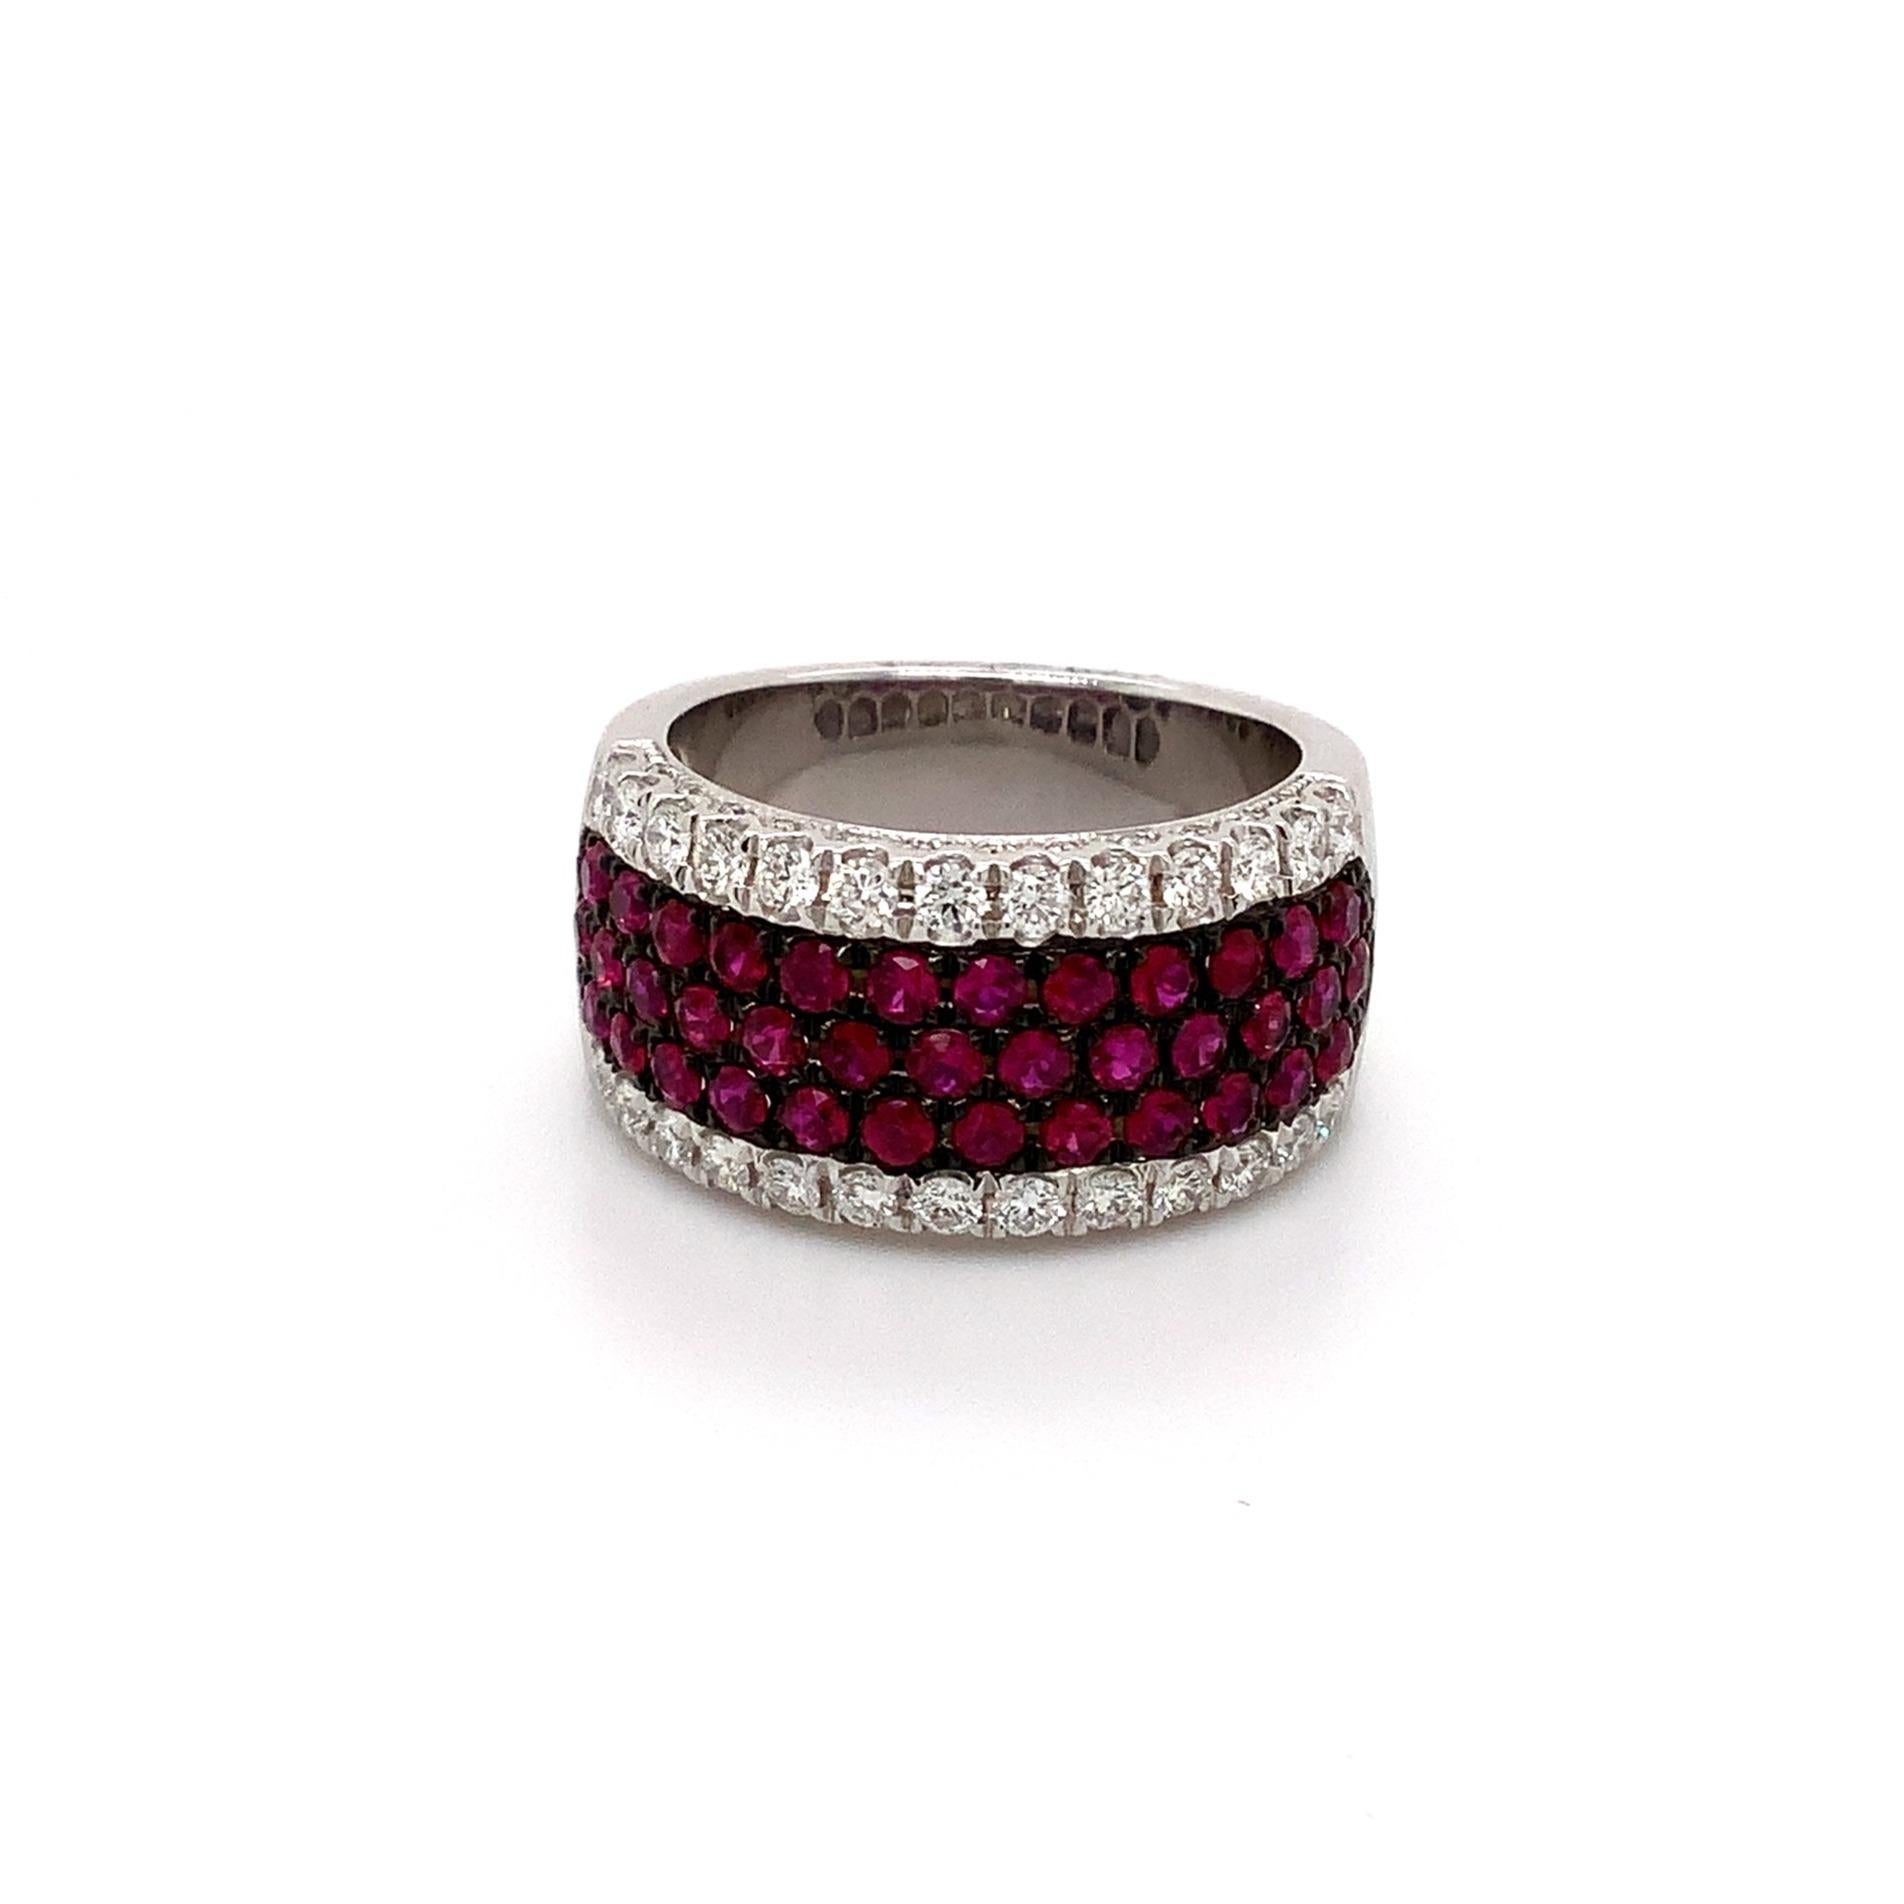 Roman + Jules Pavé Ruby And Diamond Five Row Cigar Band set in 14K White Gold with Black Rhodium Detailing.
50 Round Brilliant Cut Diamonds Equal 0.60 tw
G in Color SI in Clarity
Excellent Make and Polish.
41 Round Rubies Equal 1.29 cts.